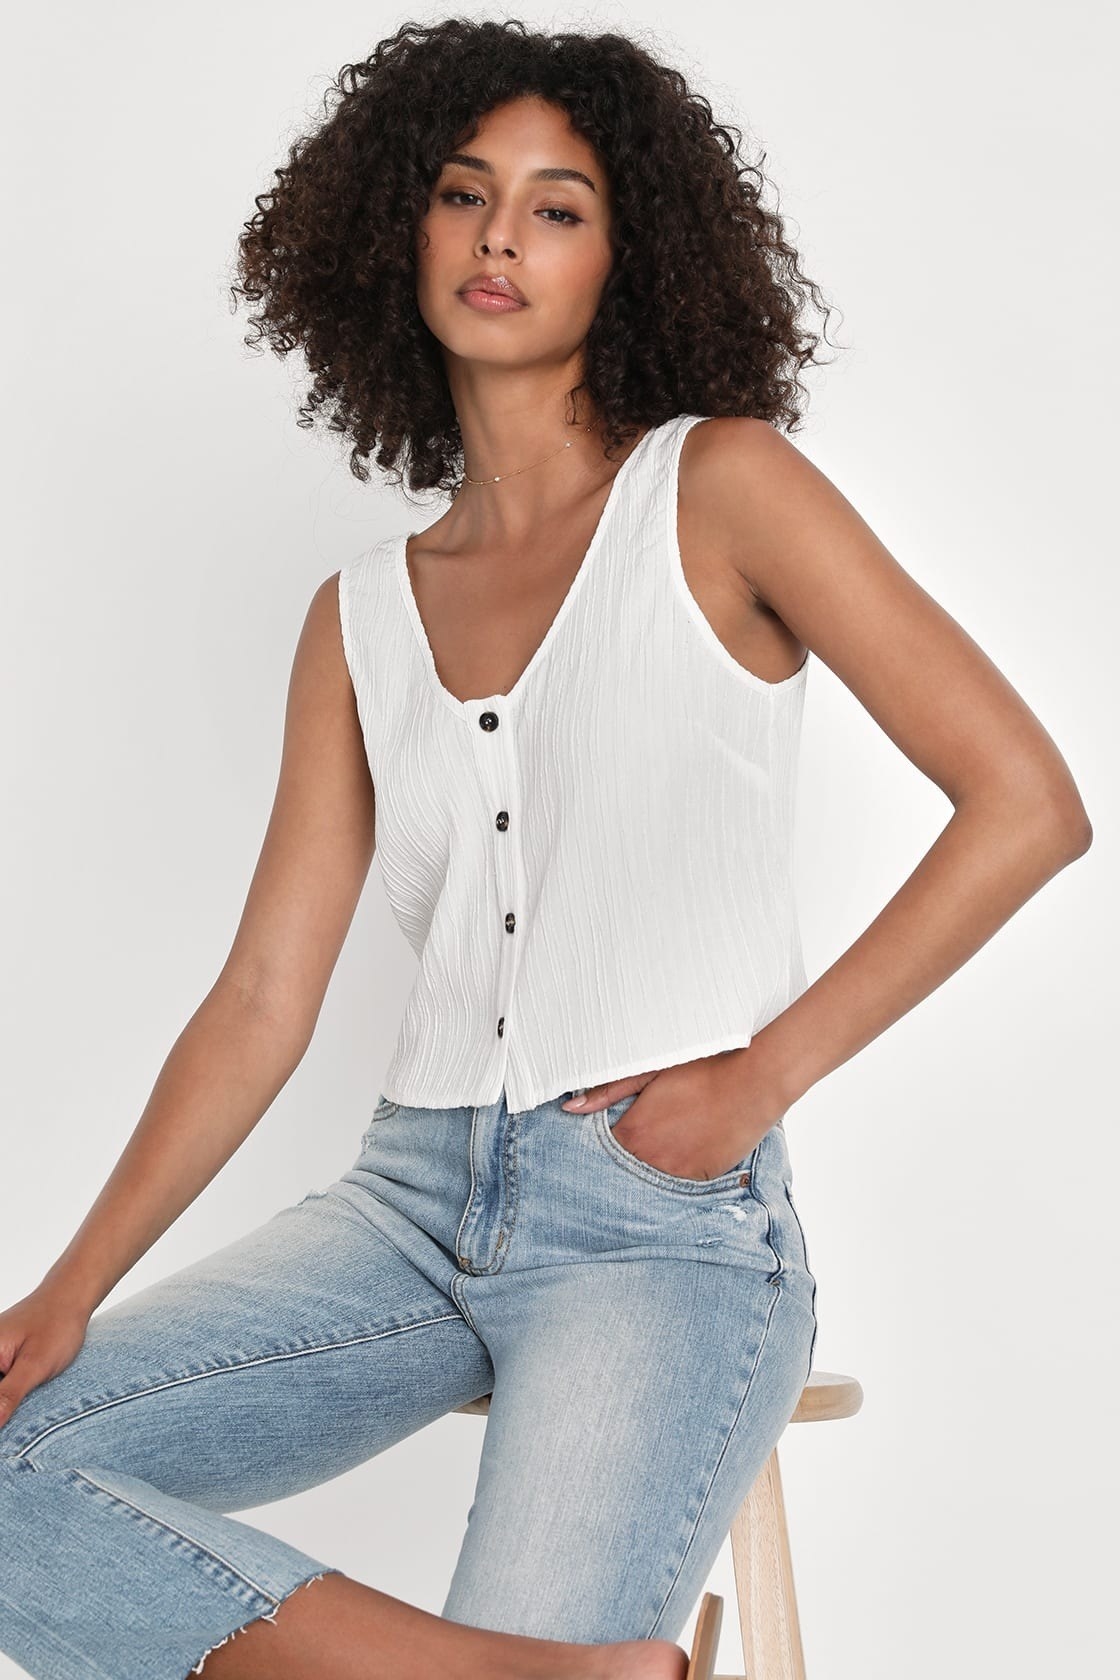 Model wearing white button down crop top with jeans